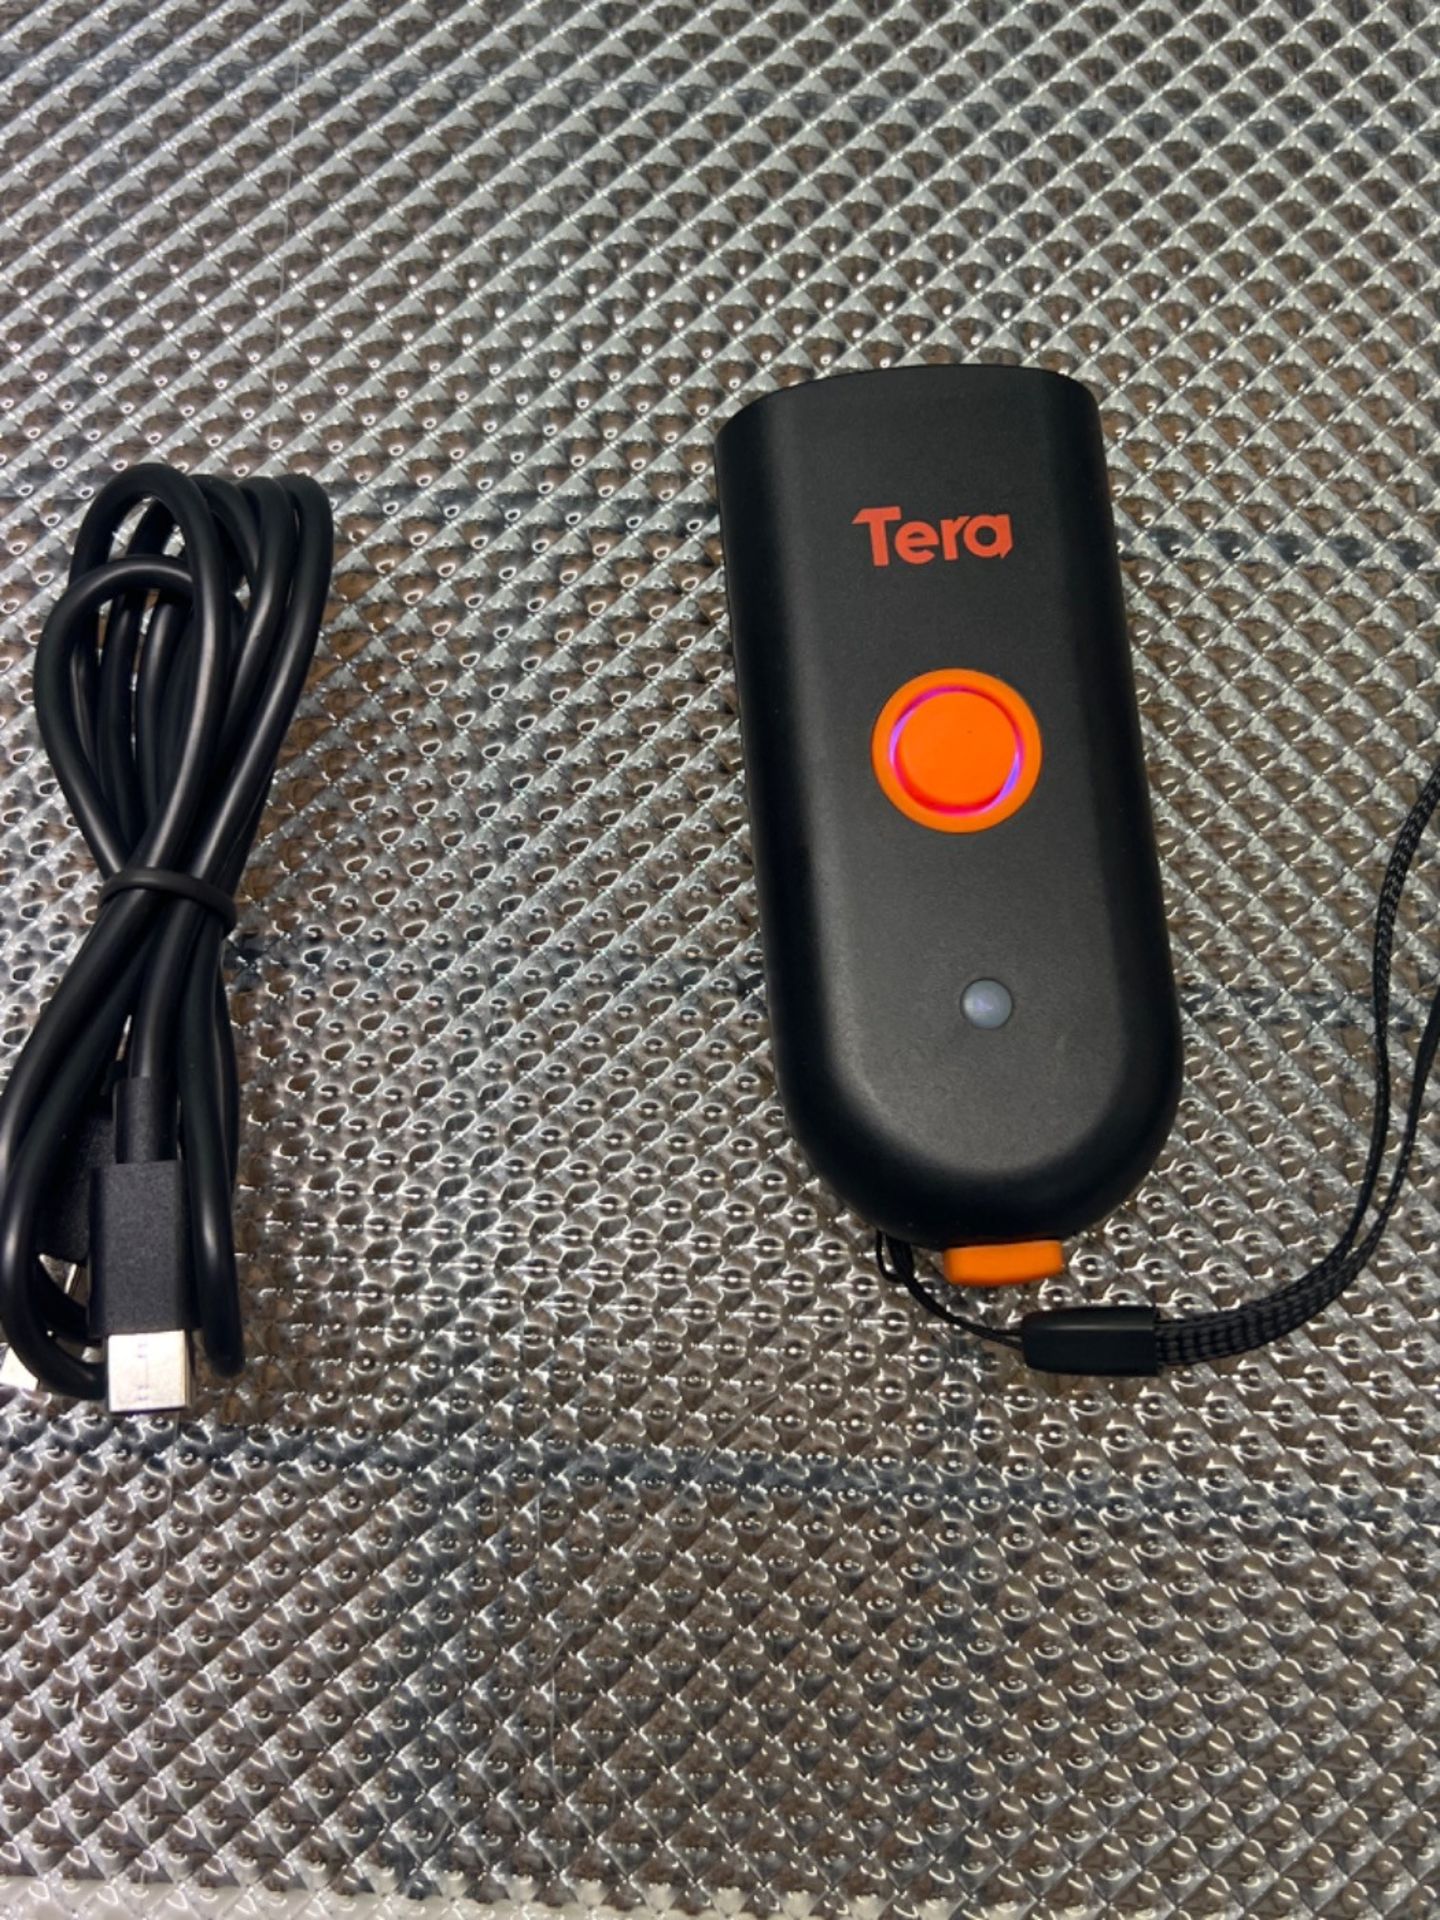 Tera Mini 1D 2D QR Bluetooth Barcode Scanner Wireless Portable 1D USB Wired Bar Code Reader 3 in 1  - Image 3 of 3